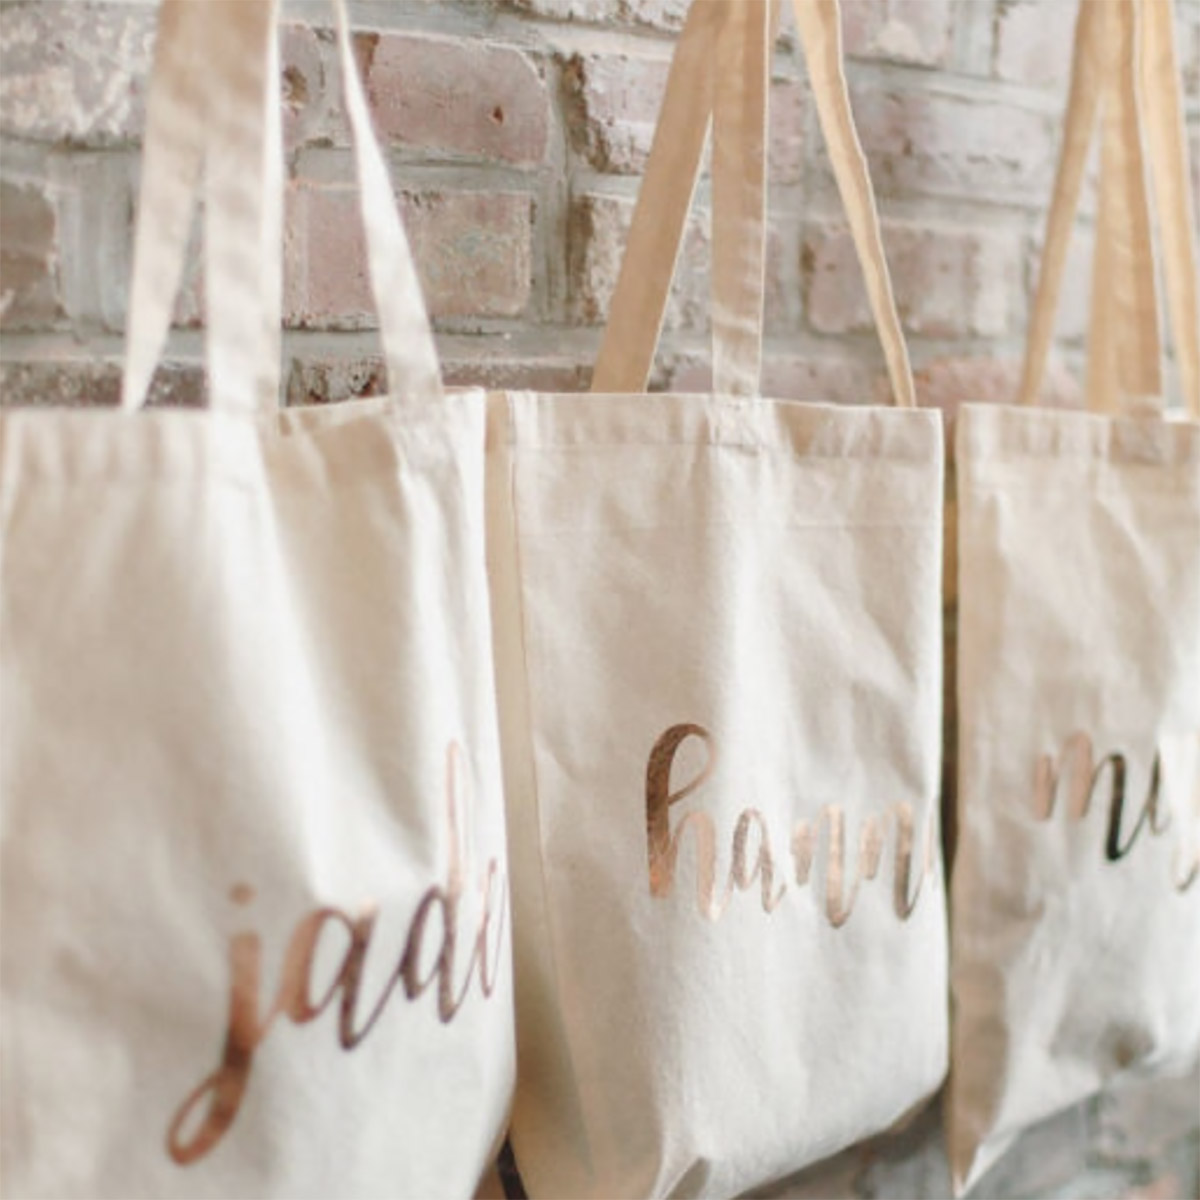 Customized Cotton Tote Bags | vlr.eng.br